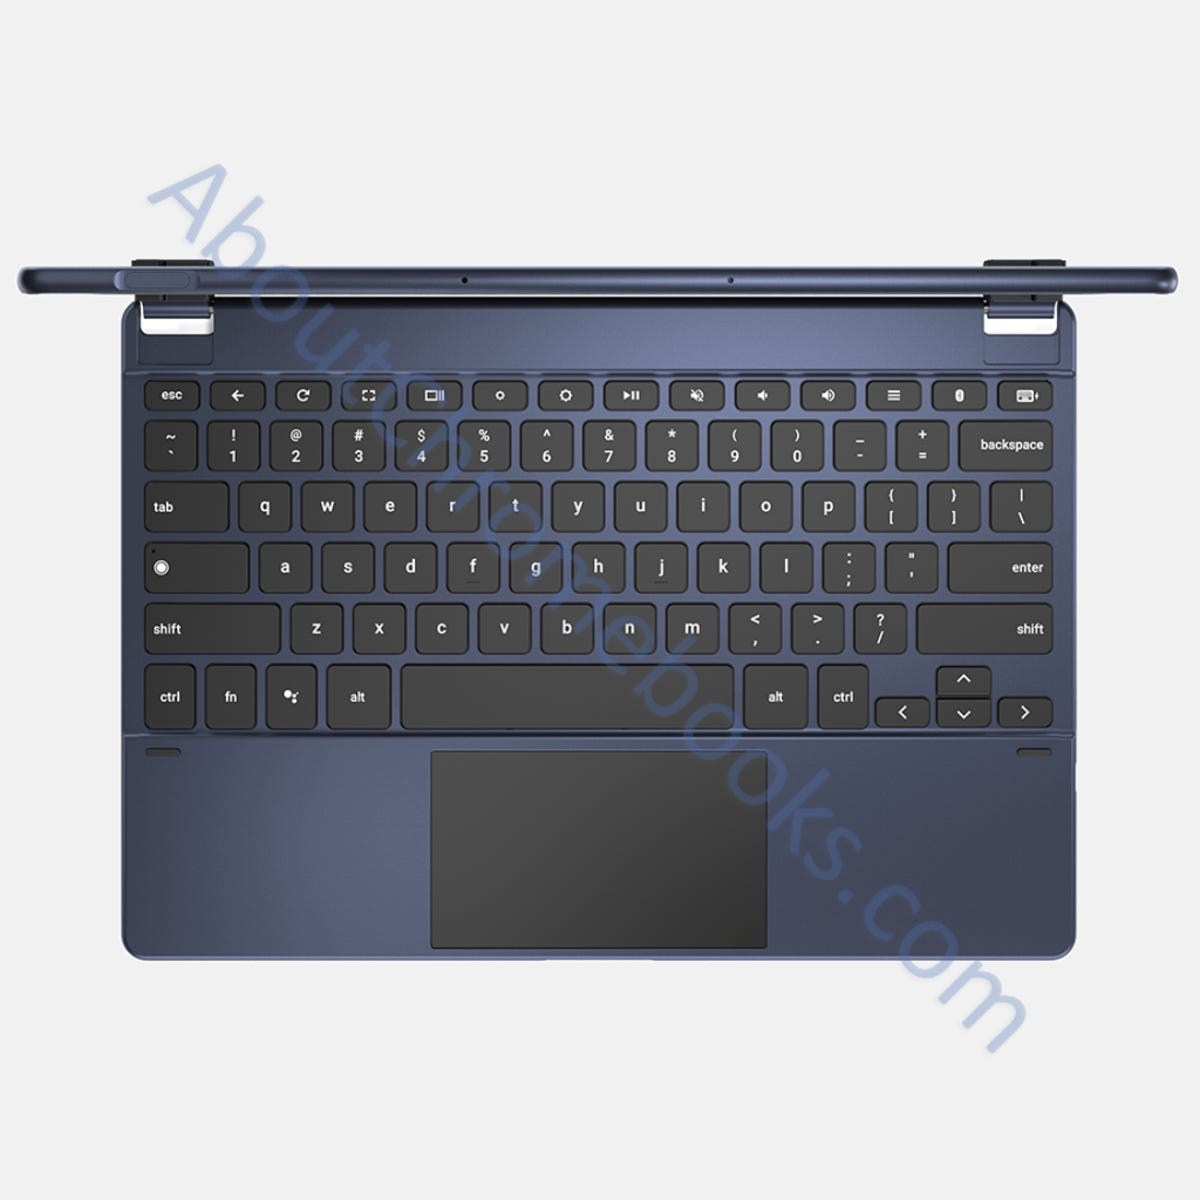 1-about-chromebooks-wallaby-keyboard-with-chrome-tablet-top